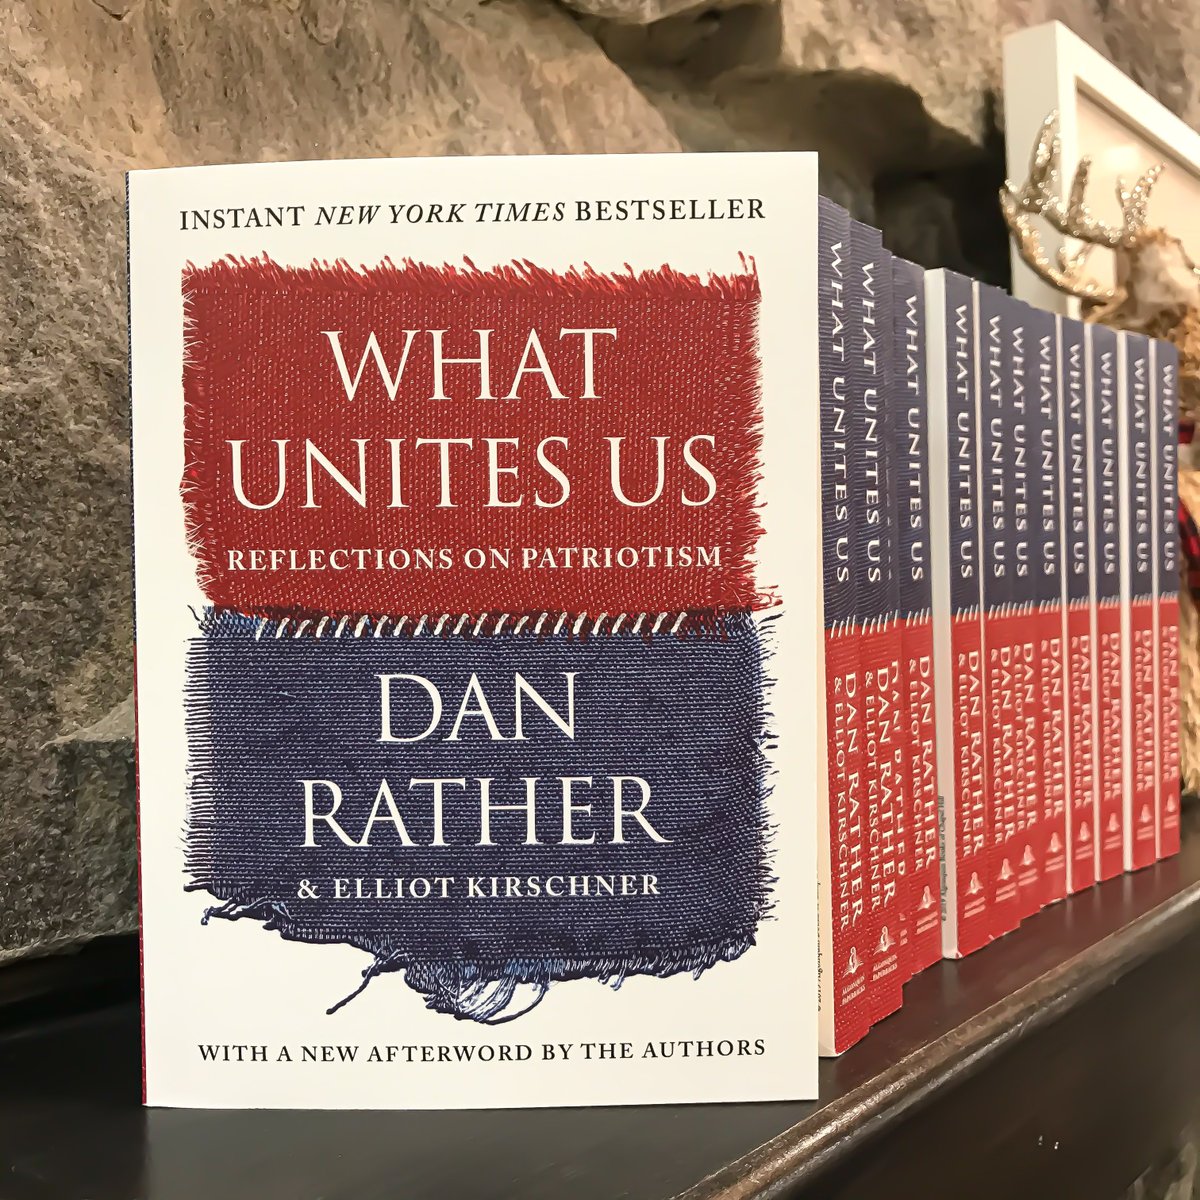 Indie bookshops are a huge part of what unites a community, and your support makes that possible. We're thrilled to be part of the #IndieBookstoreChallenge for #WhatUnitesUs by @DanRather! Please help us clear our shelves today by purchasing a copy: bit.ly/39FrSFa